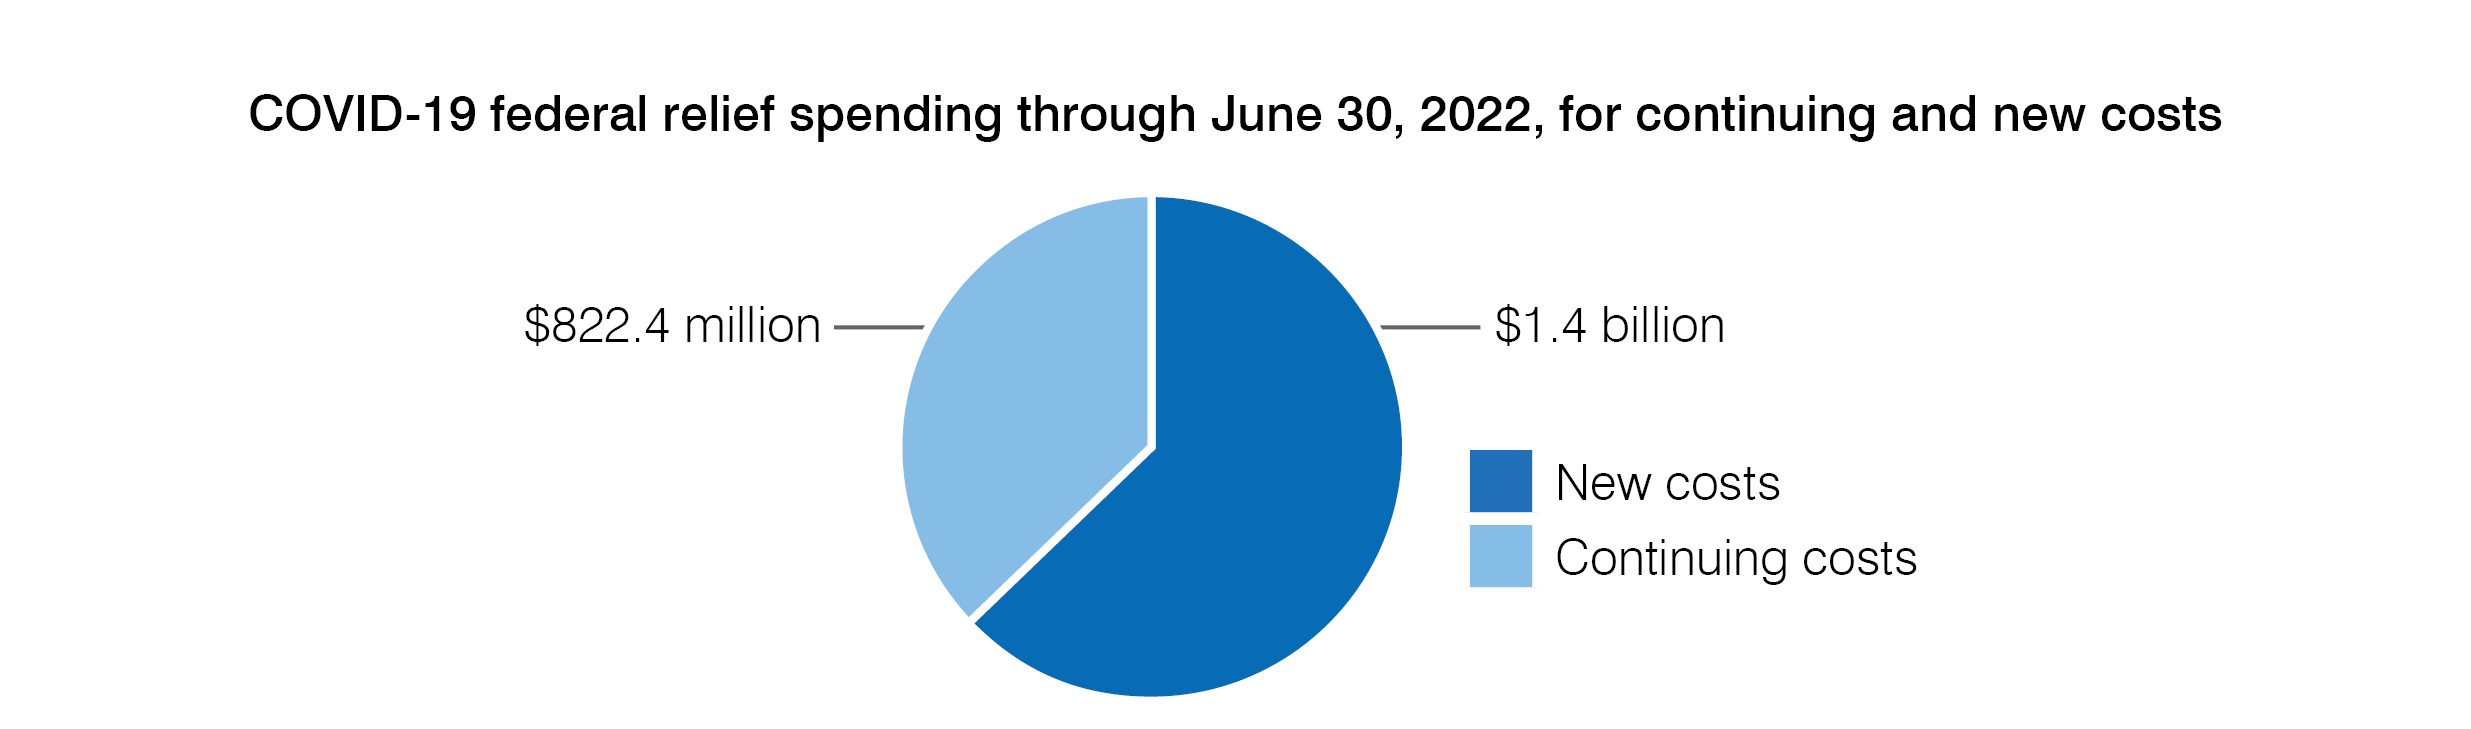 Pie Chart (COVID-19 federal relief spending through June 30, 2022, for continuing and new costs)